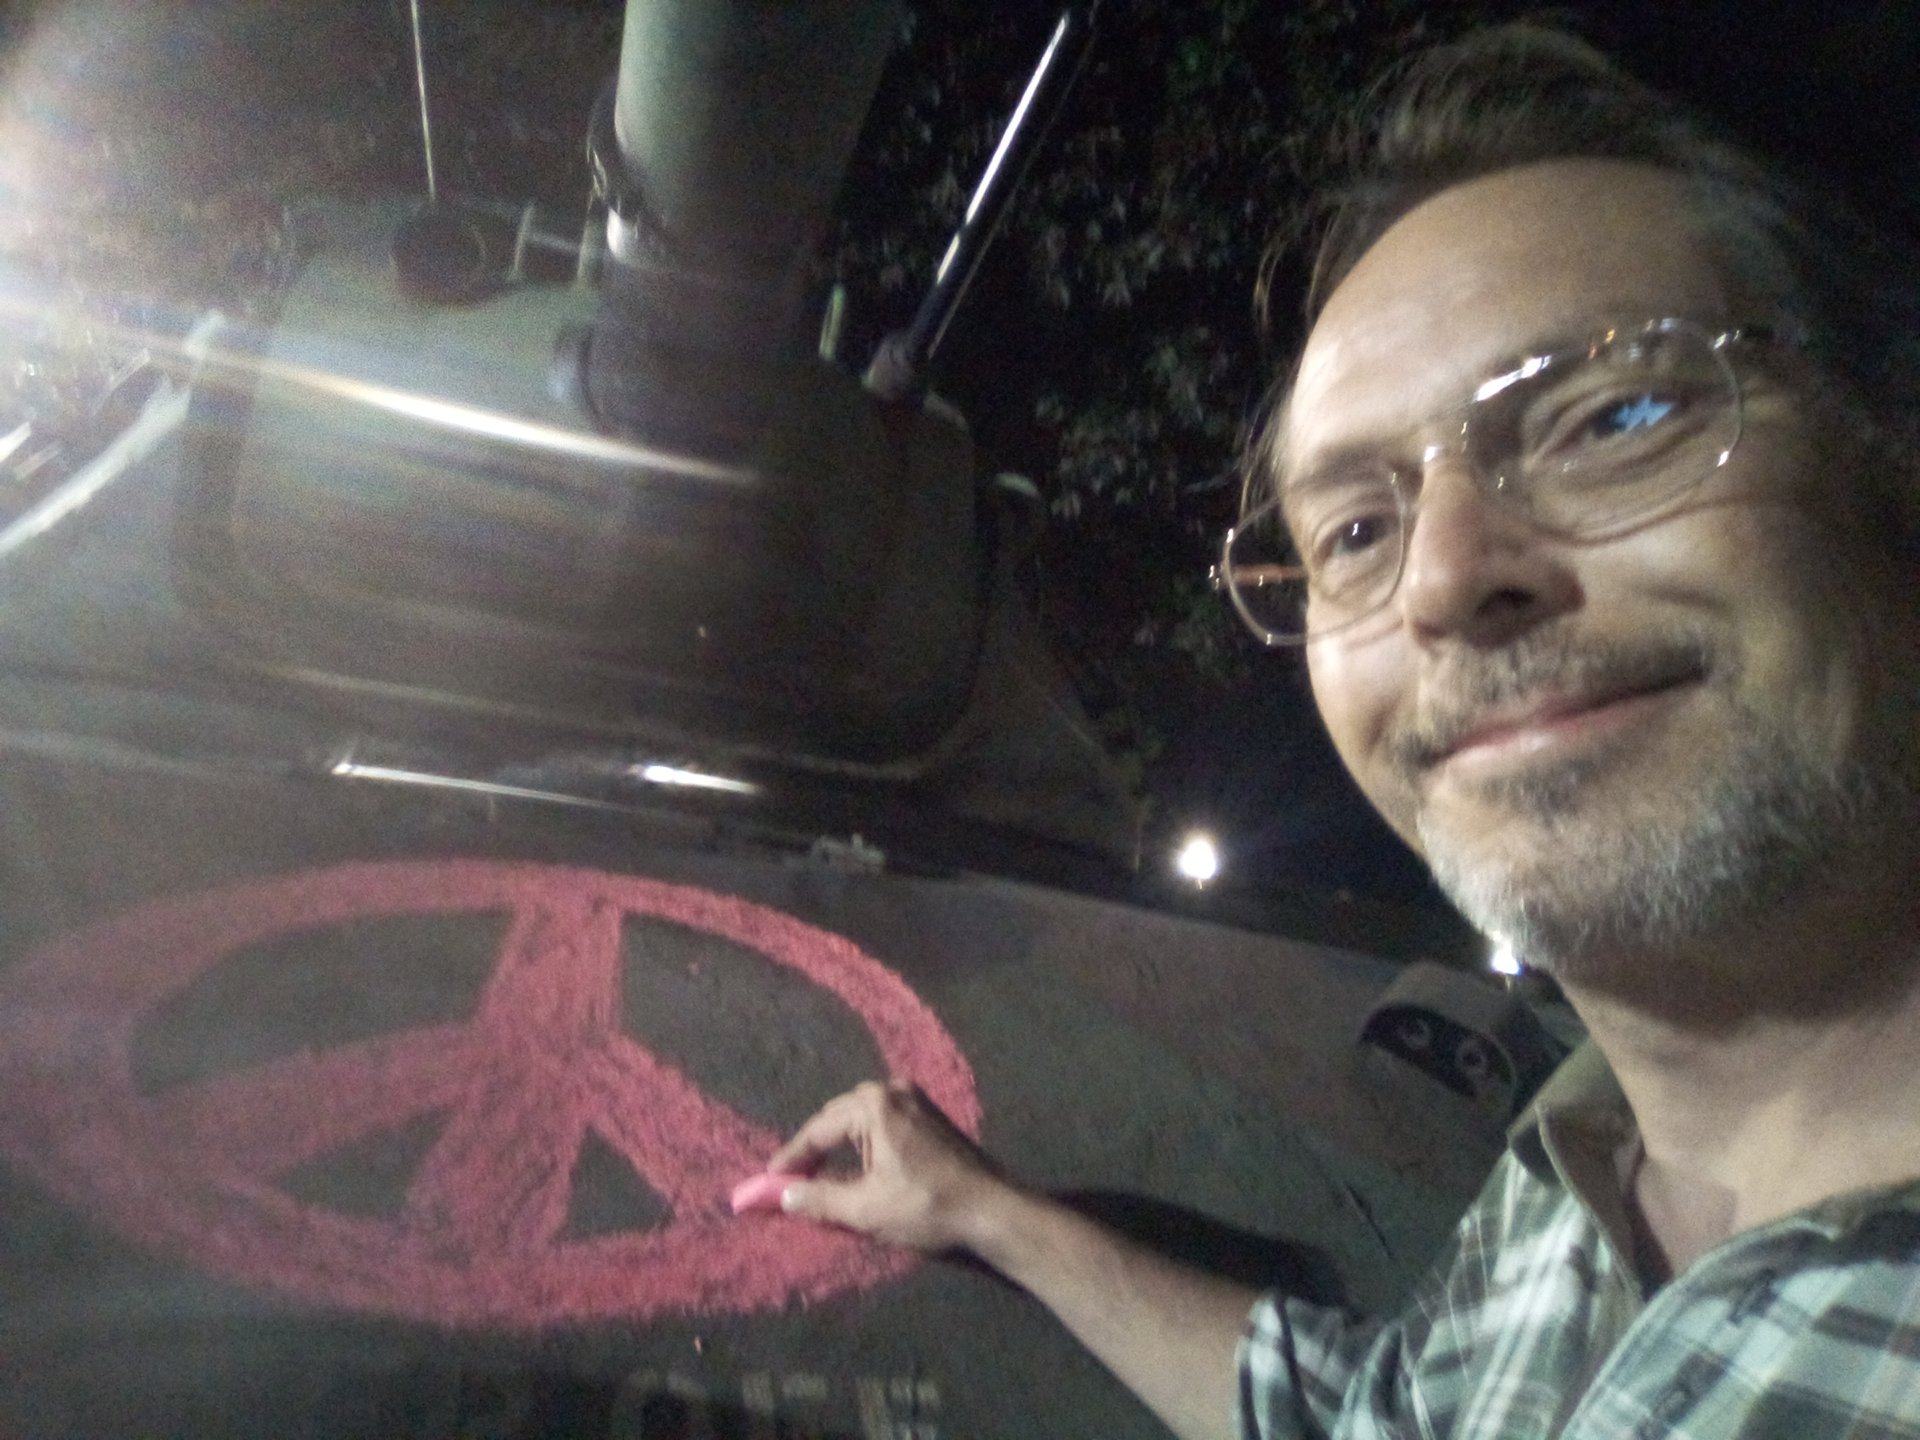 Donnie Love drawing a peace sign on the front of te tank with chalk